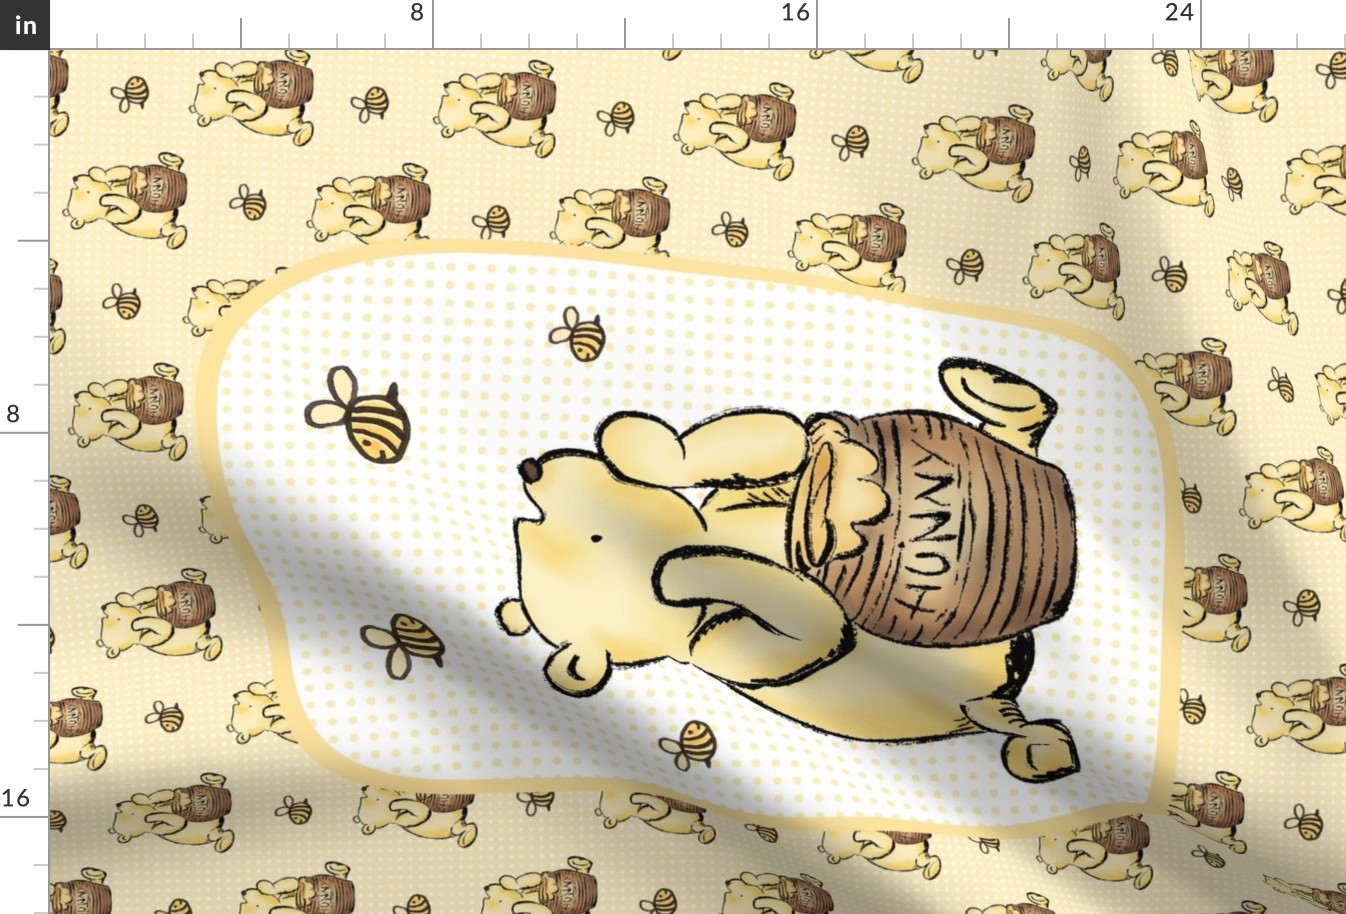 Large 27x18 Fat Quarter Panel Classic Winnie The Pooh Hunny Pot on Soft Golden Yellow for Wall Hanging or Tea Towel